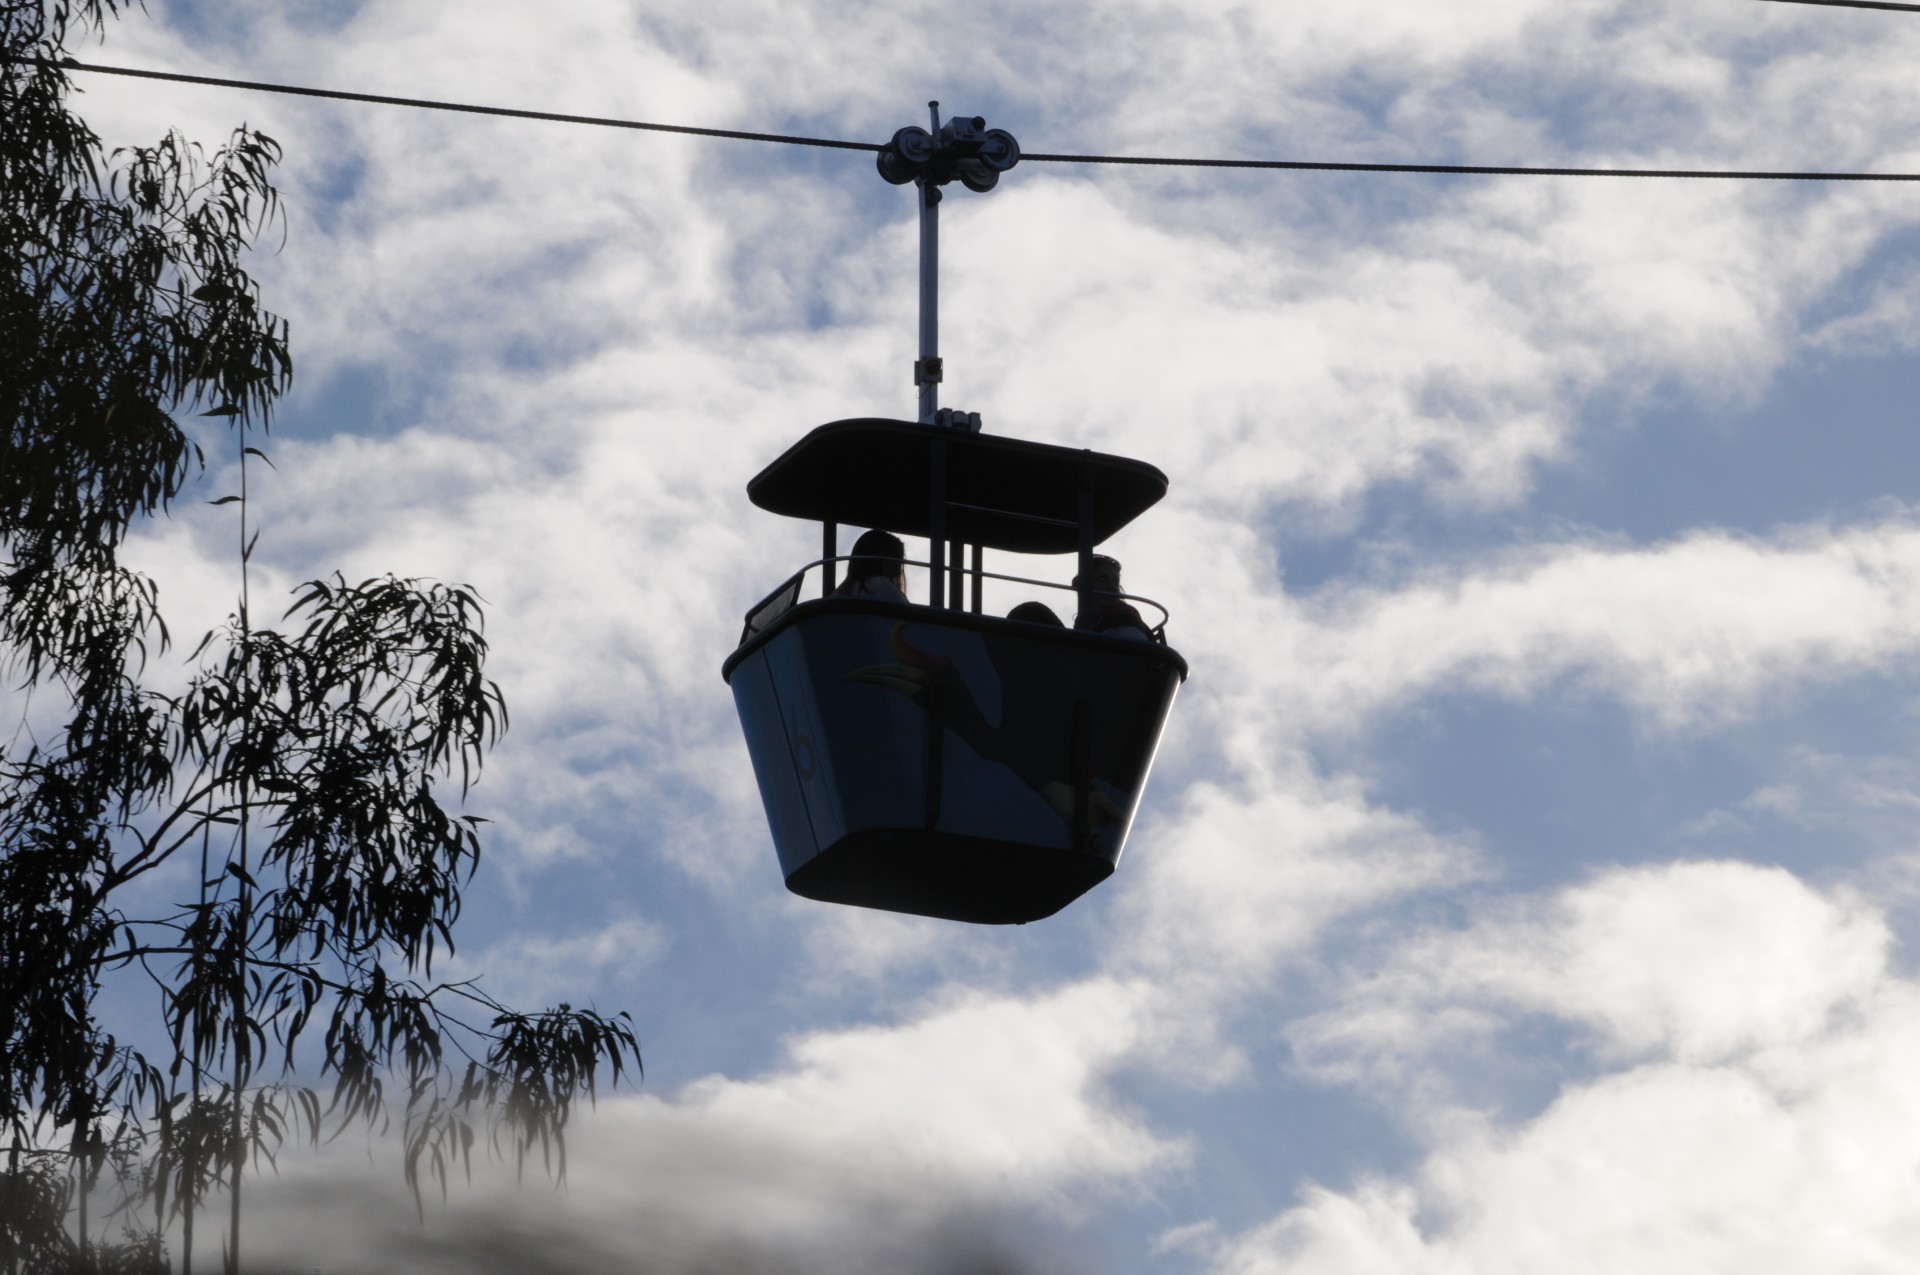 Aerial Tramway car silhouetted against bright blue sky and white clouds